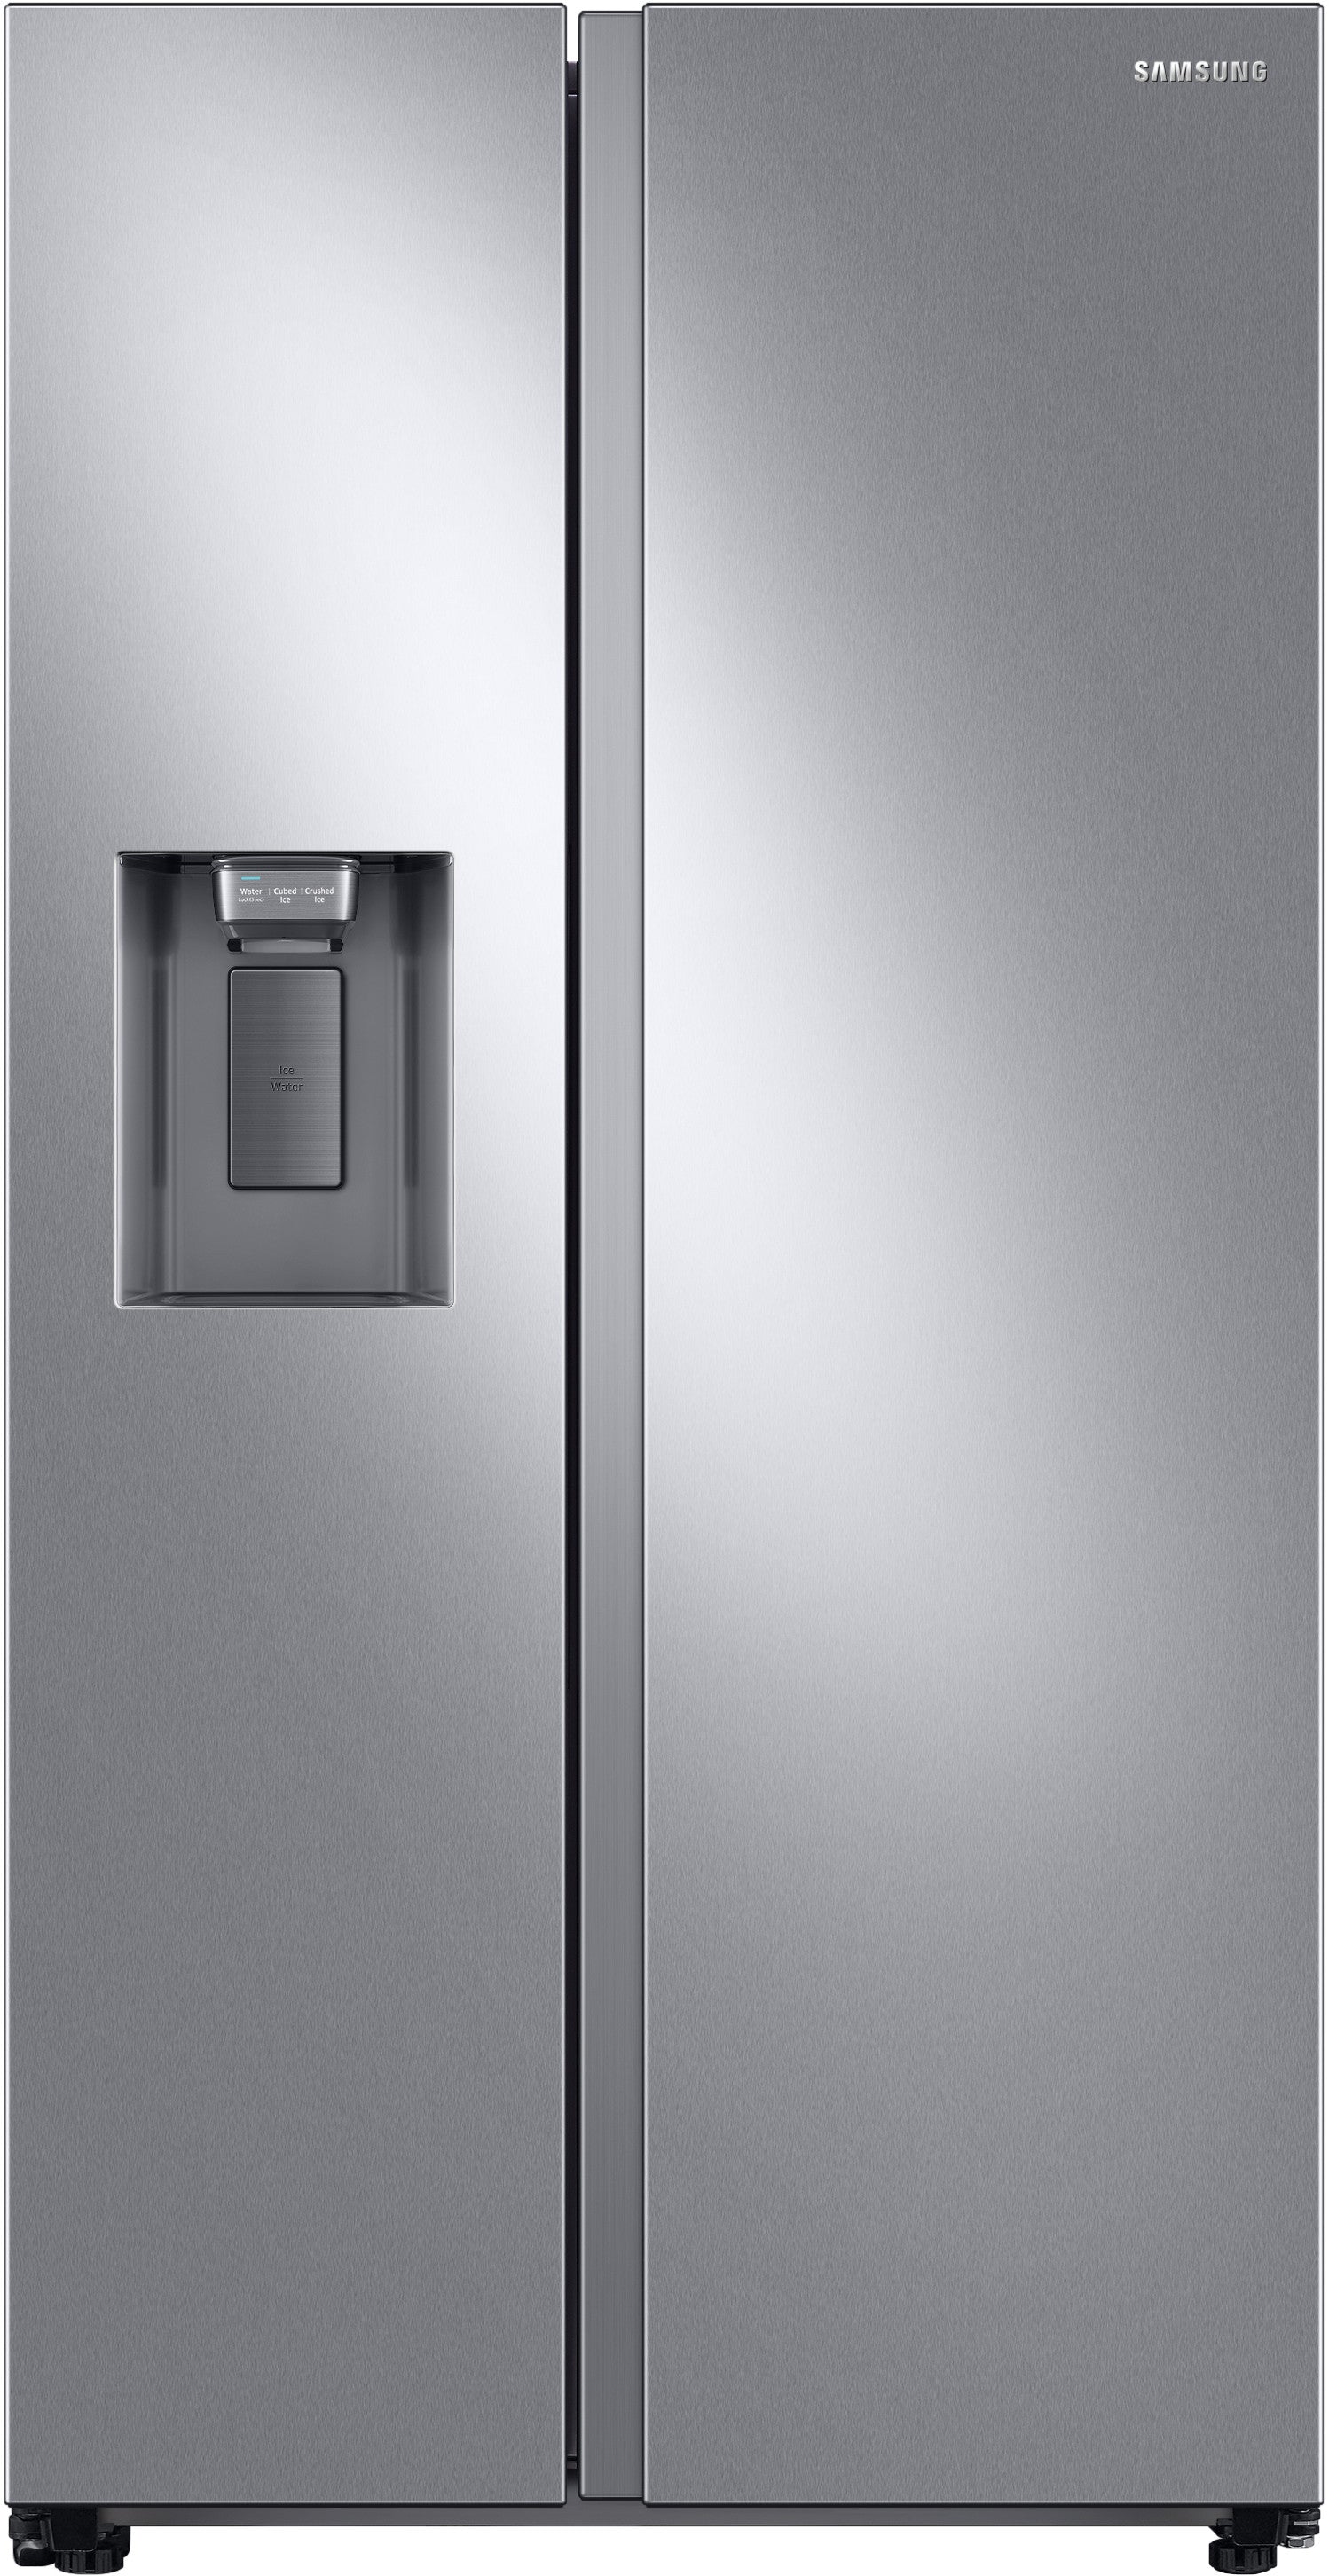 Samsung RS22T5201SR/AA 22-Cu Ft Counter-depth Side-by-side Refrigerator